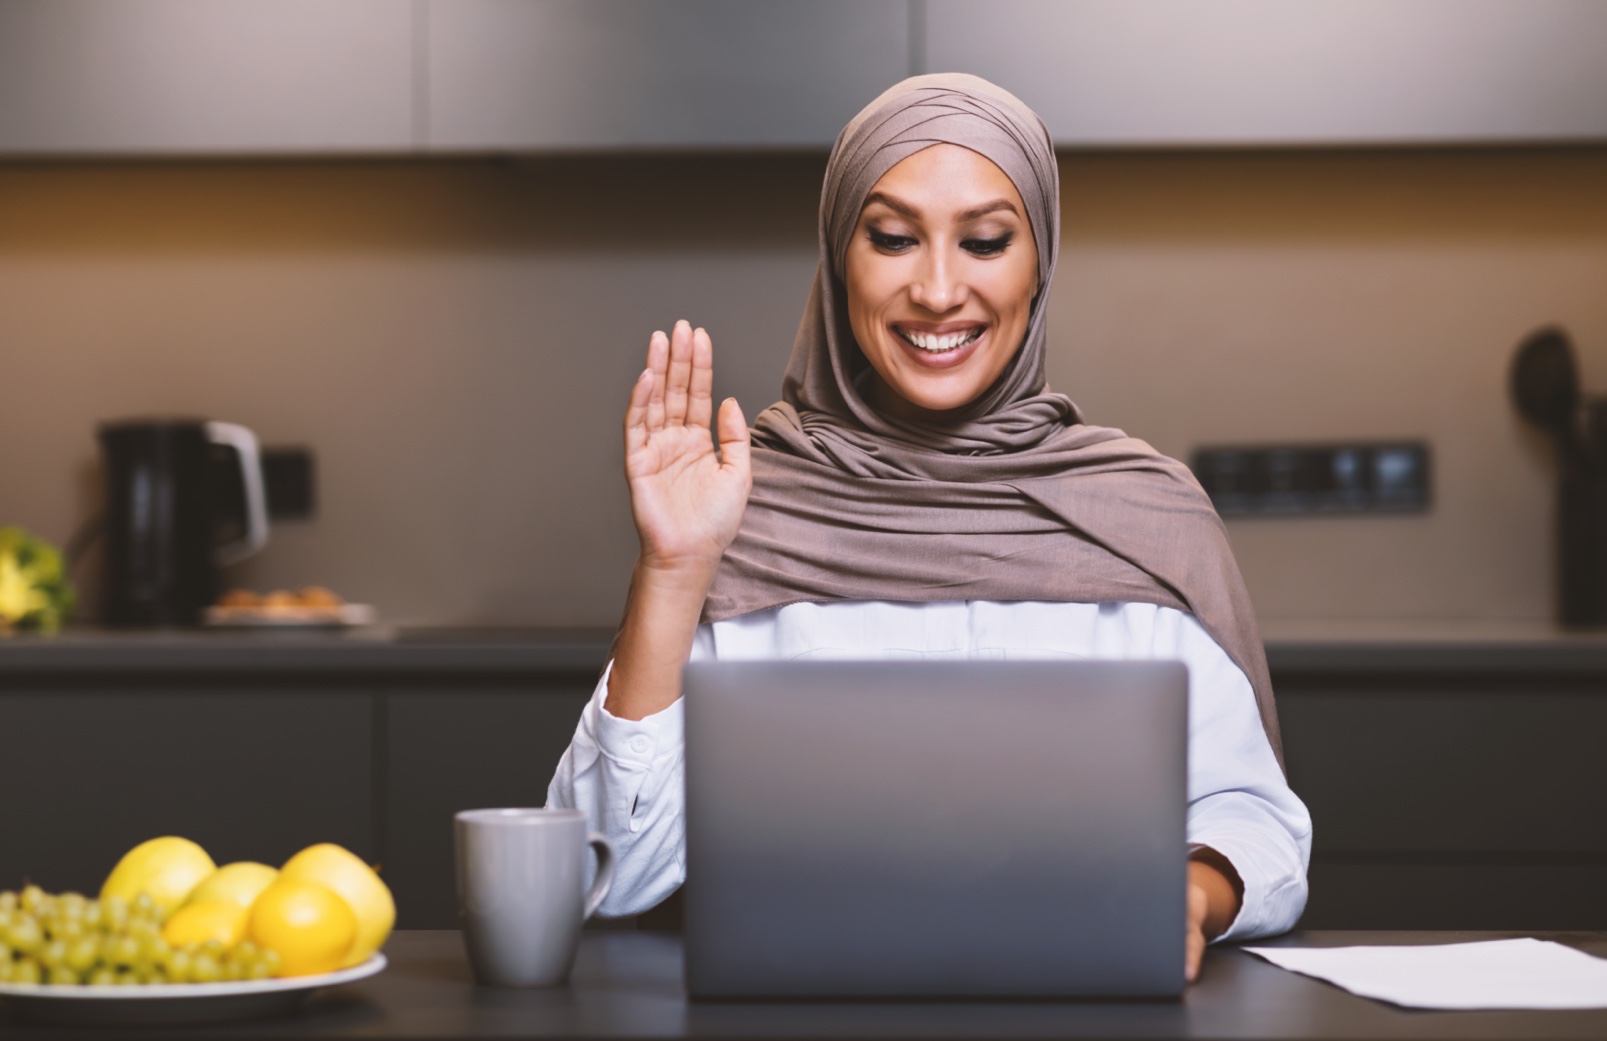 Muslim Lady At Laptop Making Video Call Waving Hello Sitting In Modern Kitchen At Home, Wearing Hijab. Arab Woman Using Computer Communicating Remotely. Female Dietitian Having Online Consultation.